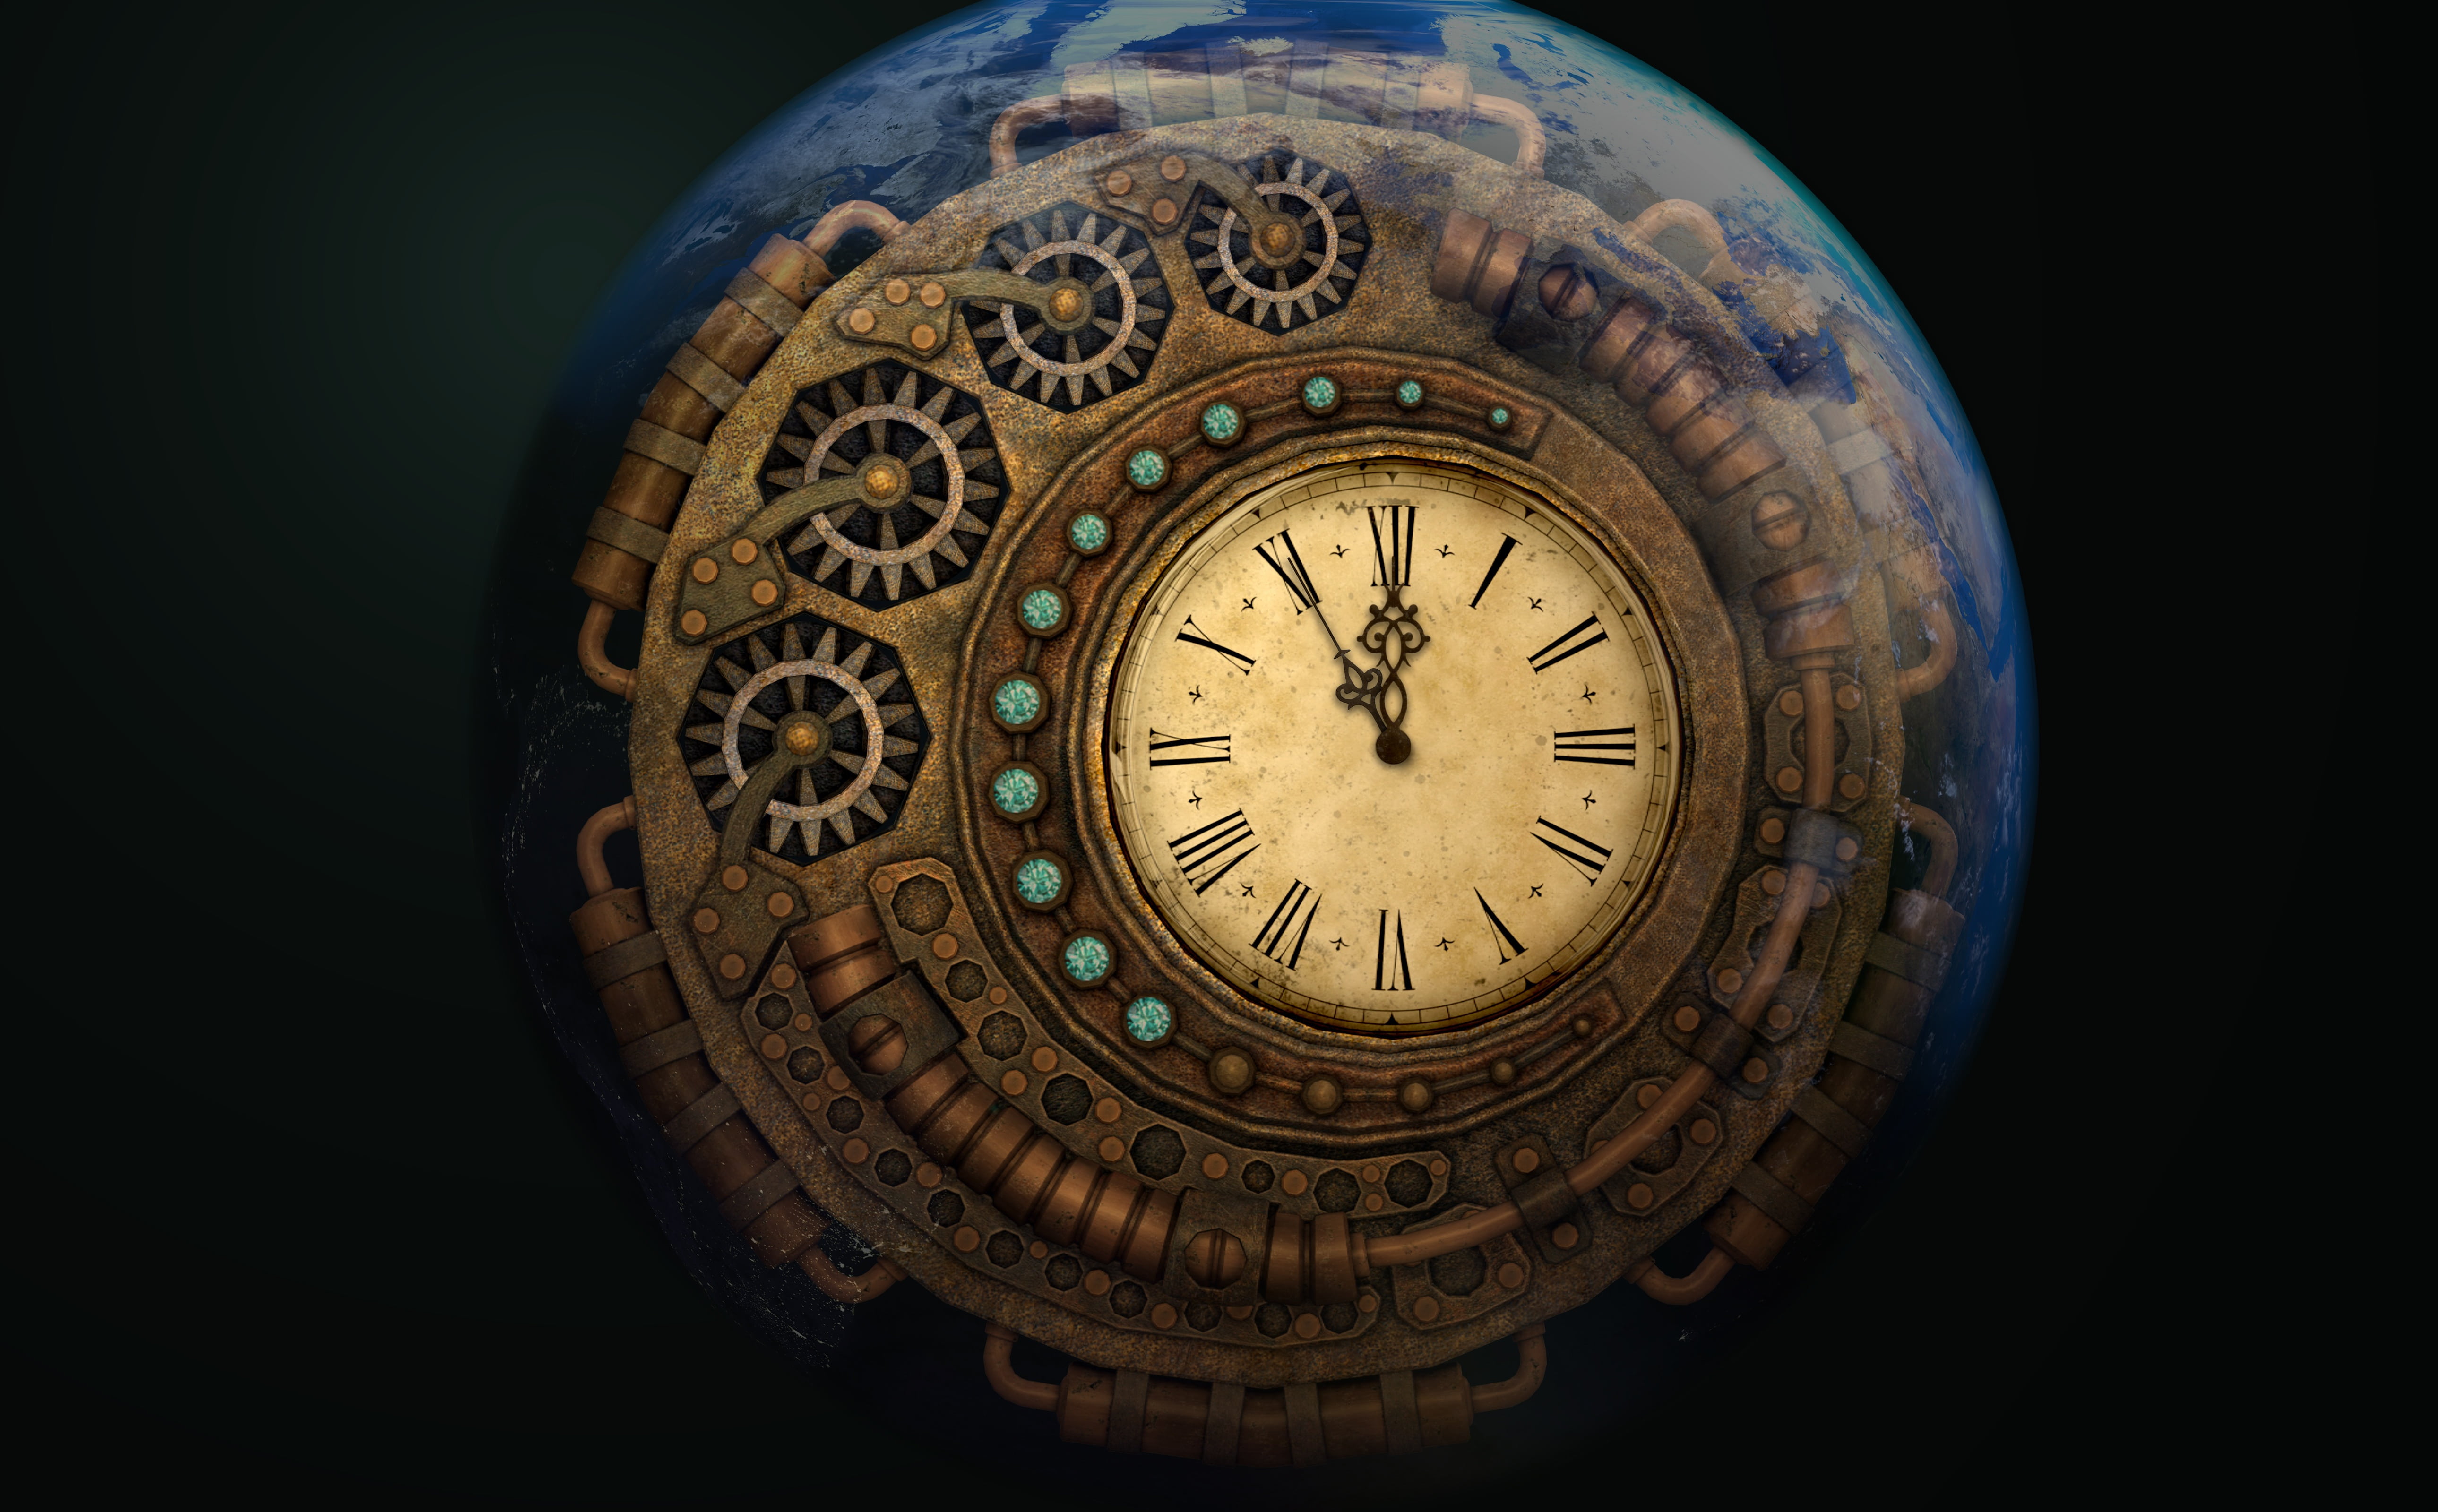 round brown clock showing 11:55, time, moondial, time machine